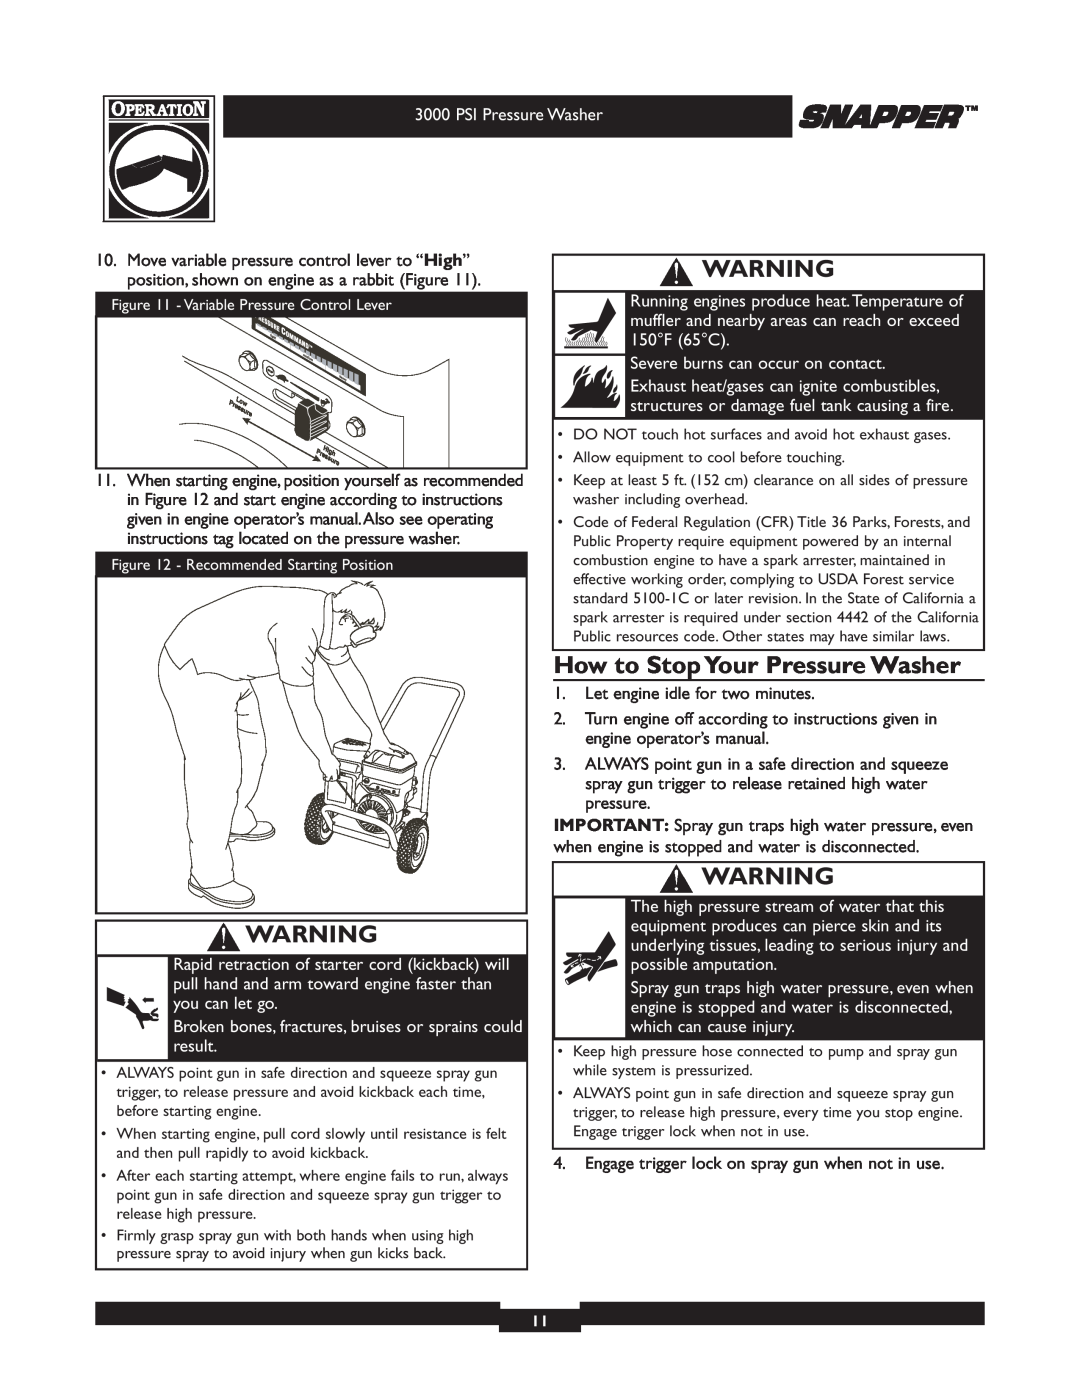 Snapper 020231-2 manual How to Stop Your Pressure Washer, PSI Pressure Washer, Severe burns can occur on contact 